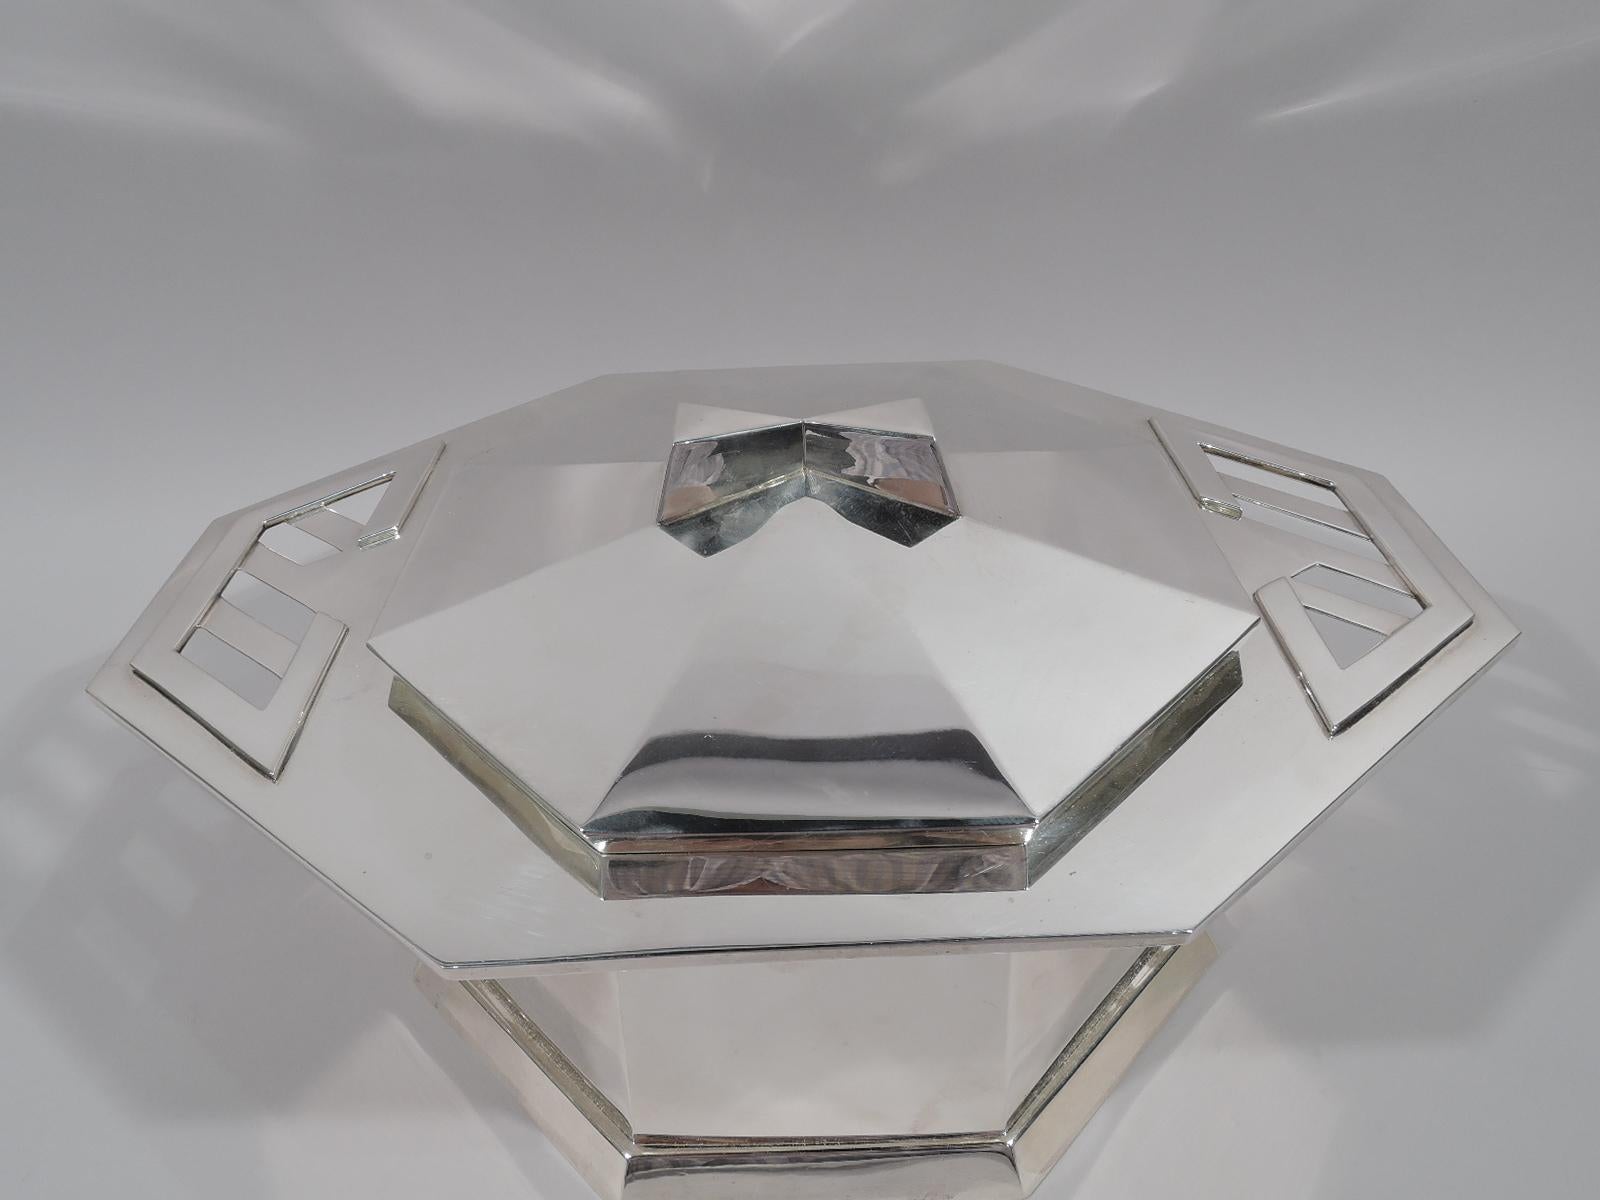 Art Deco sterling silver covered tureen after design by Frank Lloyd Wright. Retailed by Tiffany & Co. in New York. Octagonal bowl and wide and overhanging rim with applied and cutout Modern fretwork handles. Spread base. Raised cover with soft